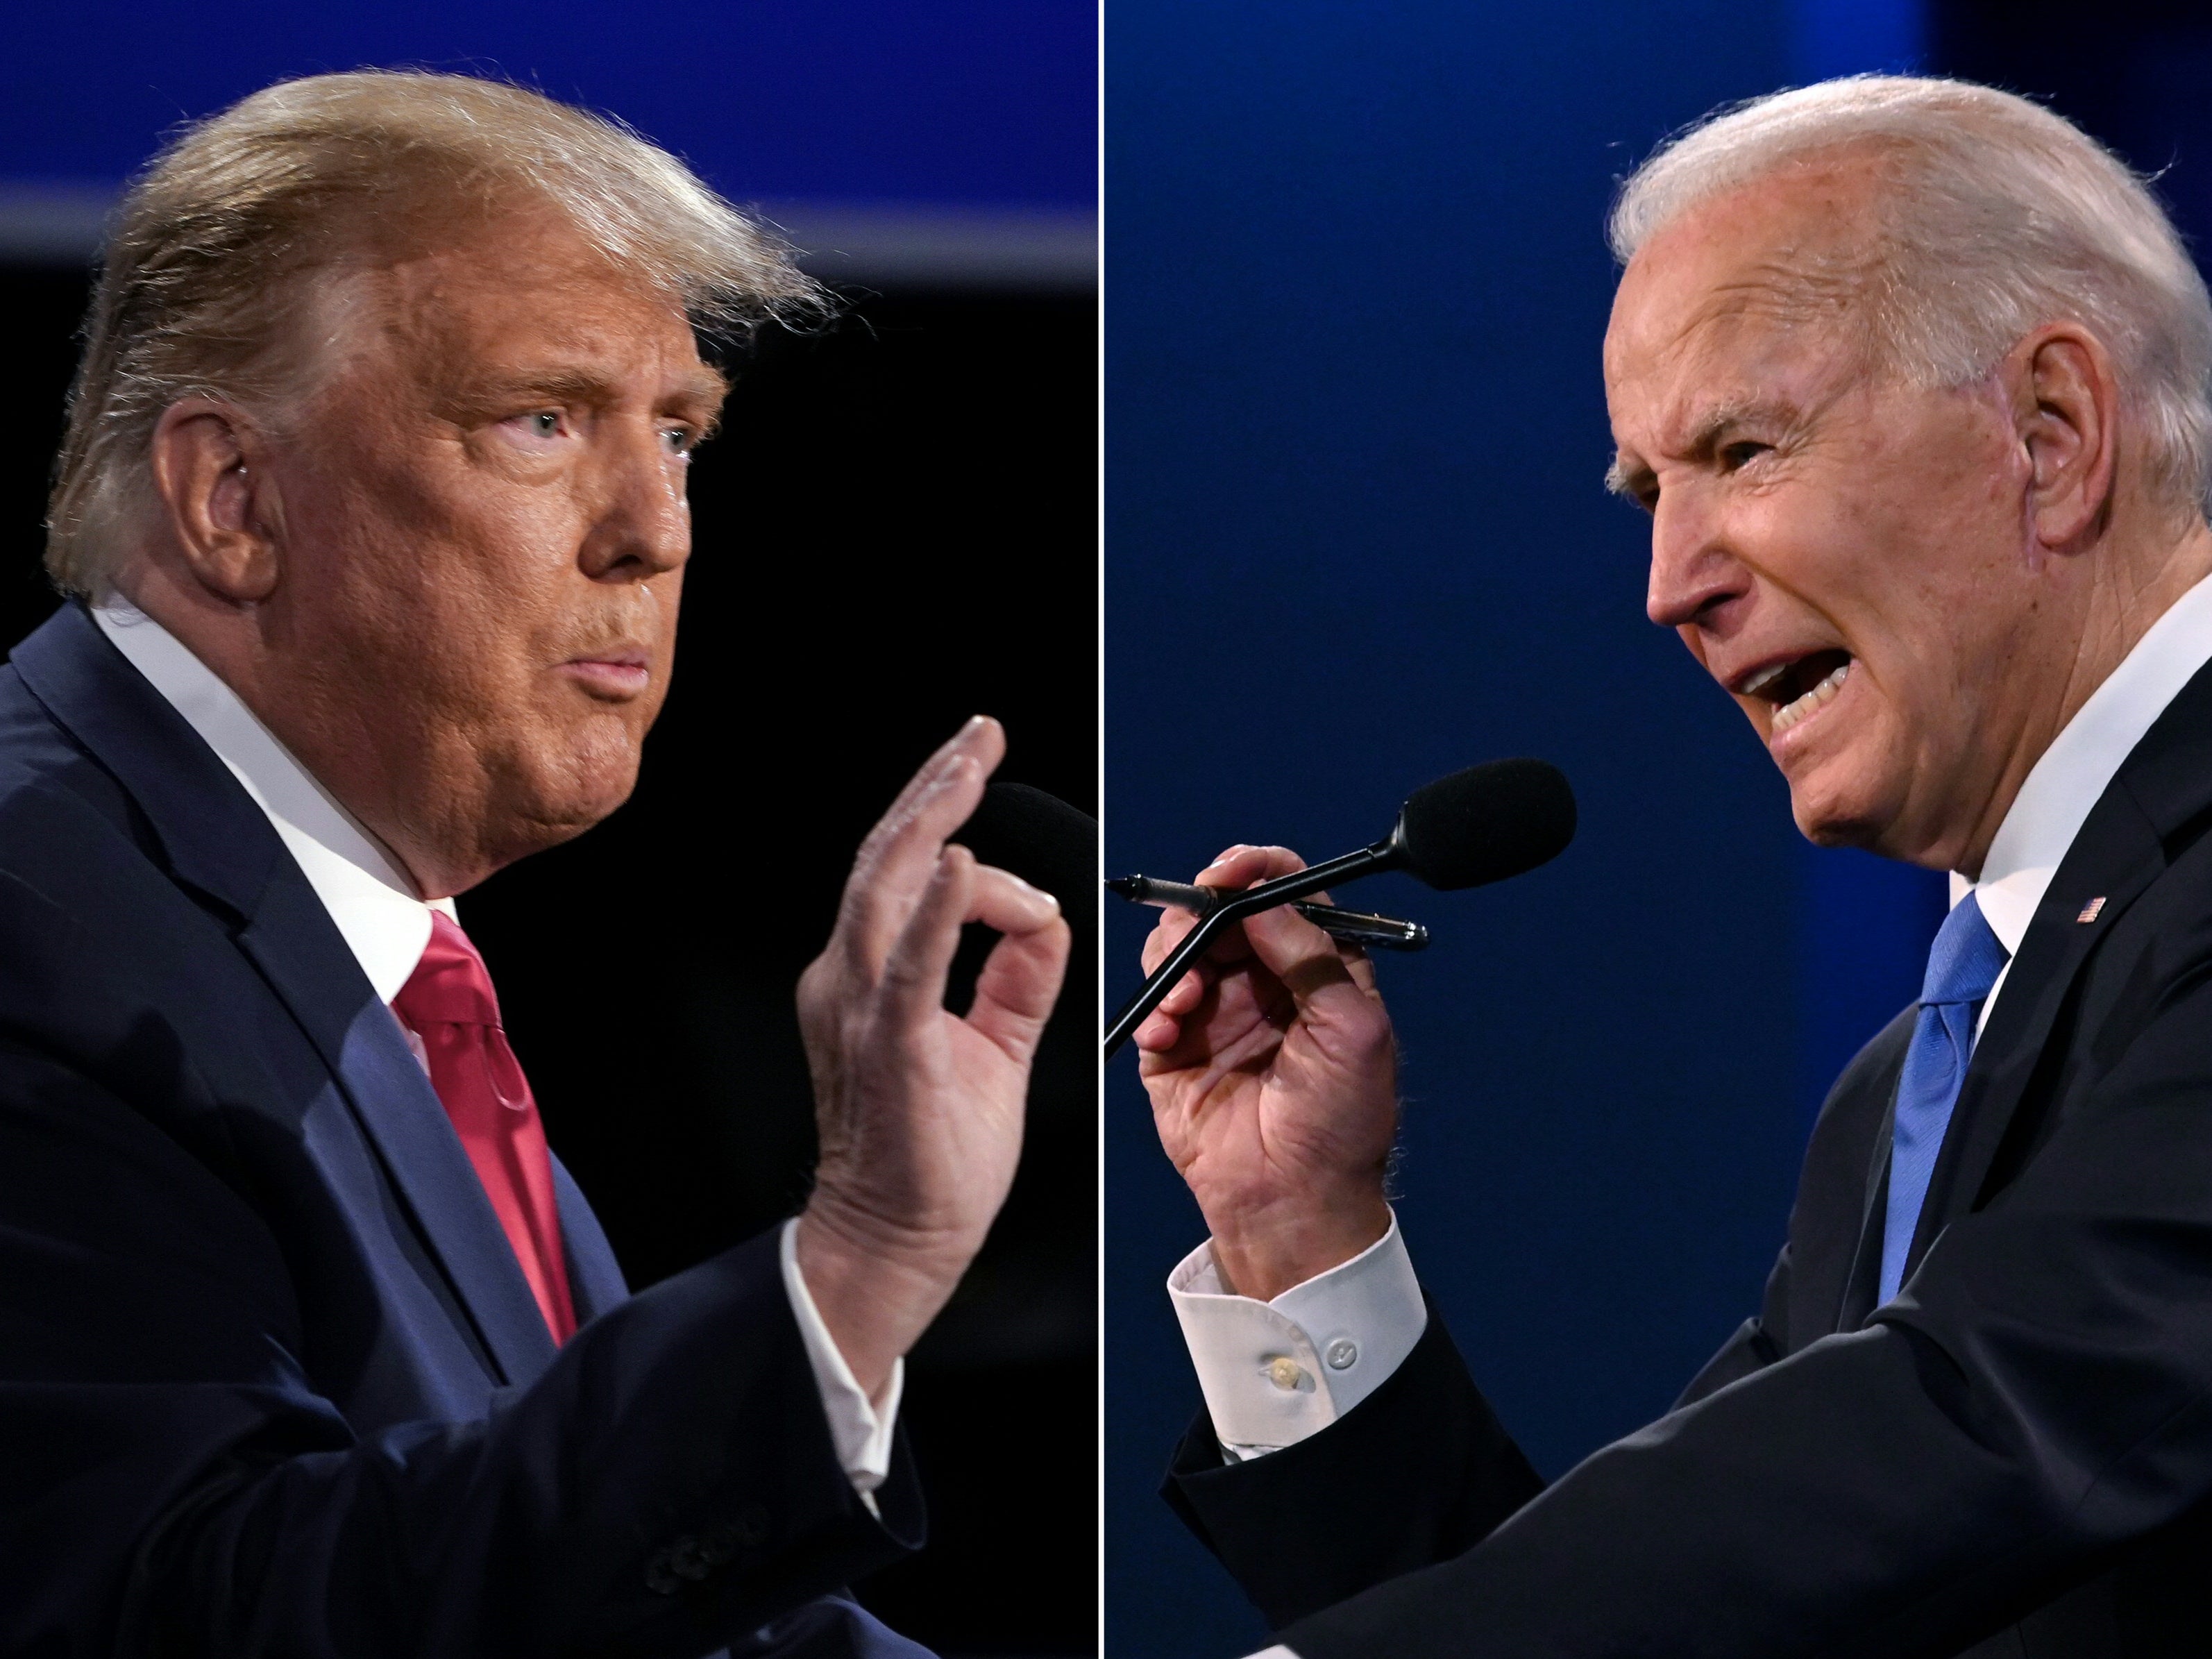 Biden and Trump during the final presidential debate at Belmont University in Nashville, Tennessee, on 22 October